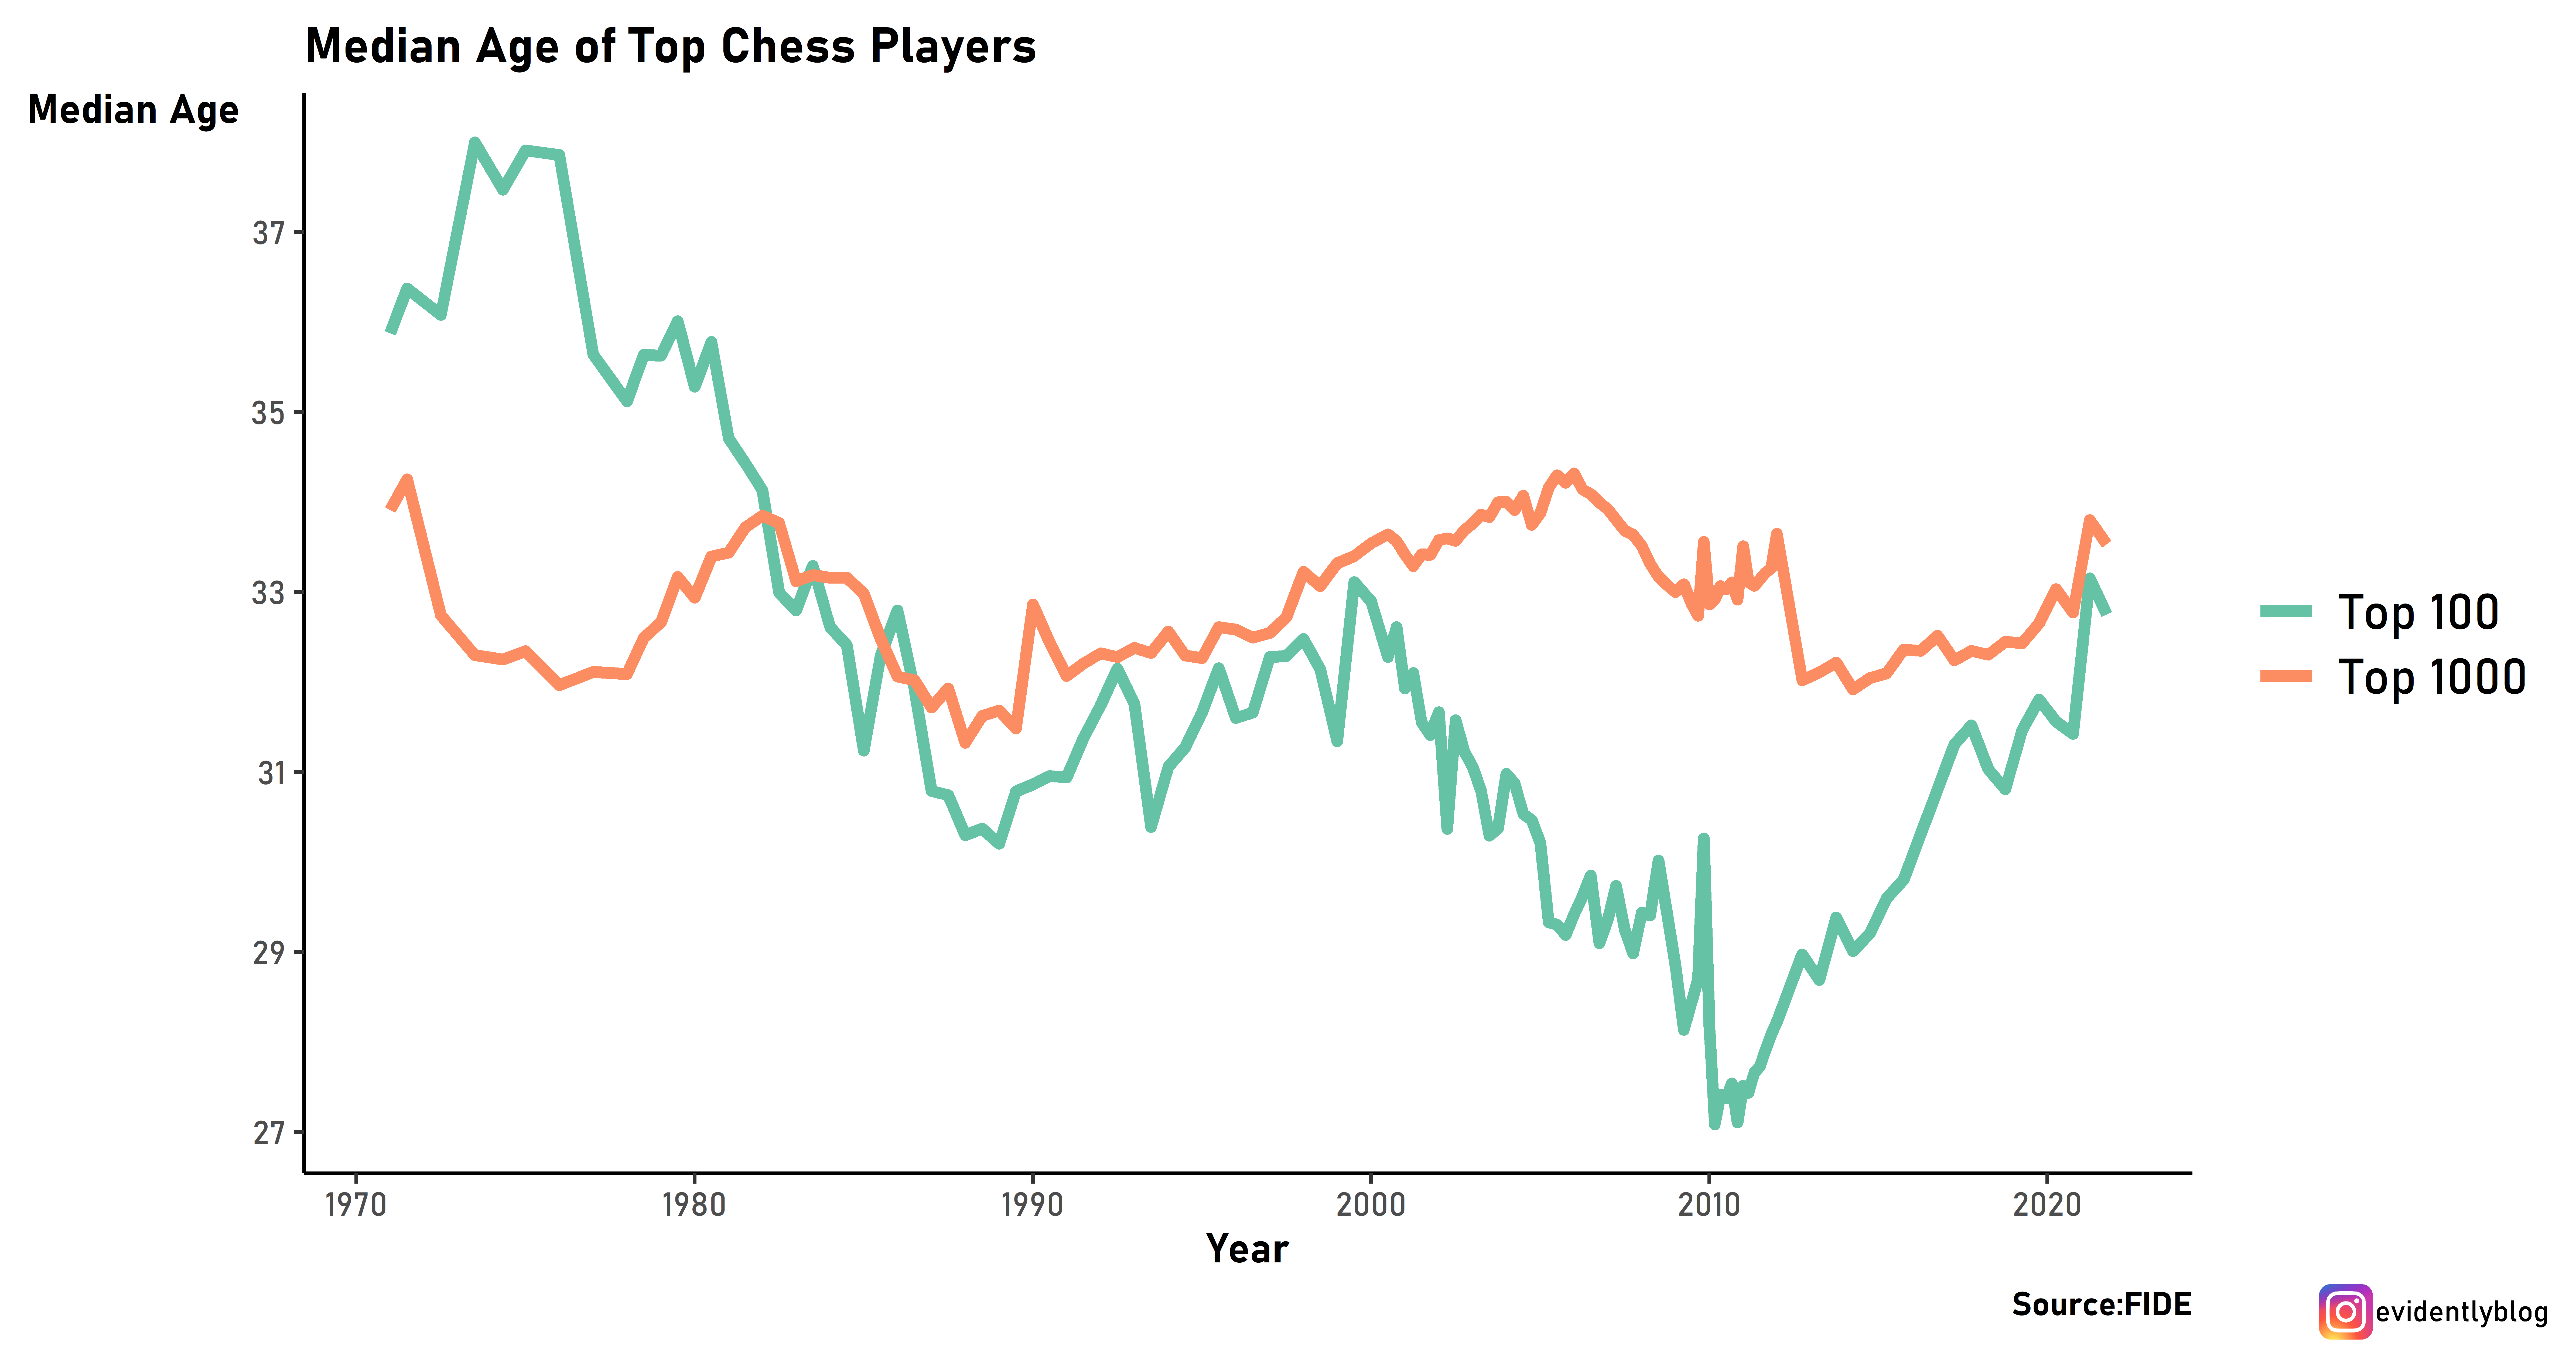 What is the range of FIDE/ELO scores where most chess players are